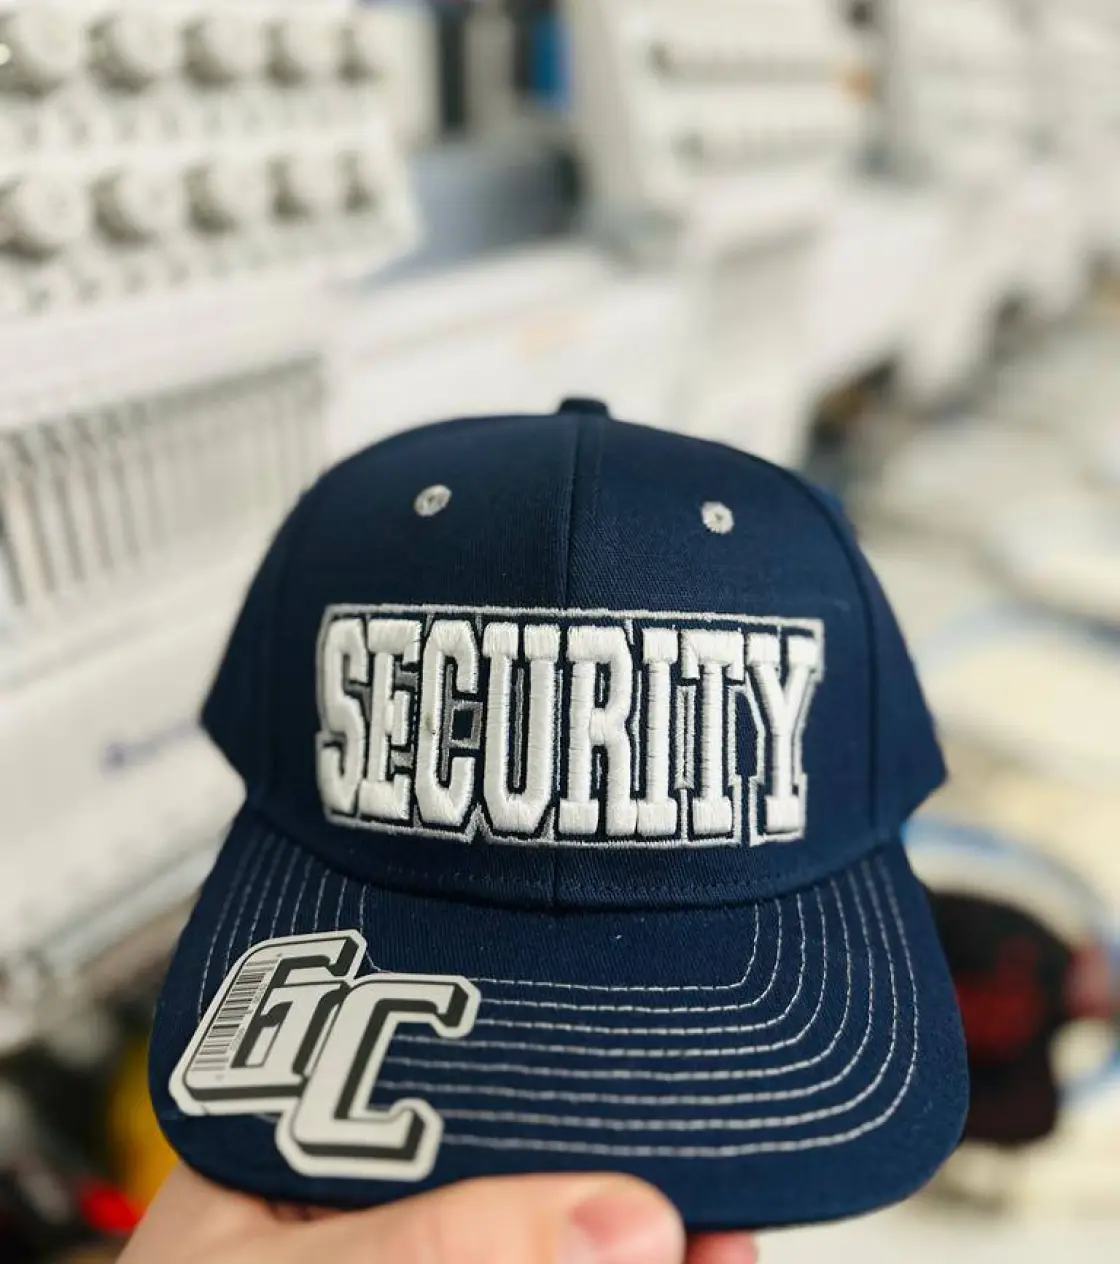 Blue hat with security embroidery